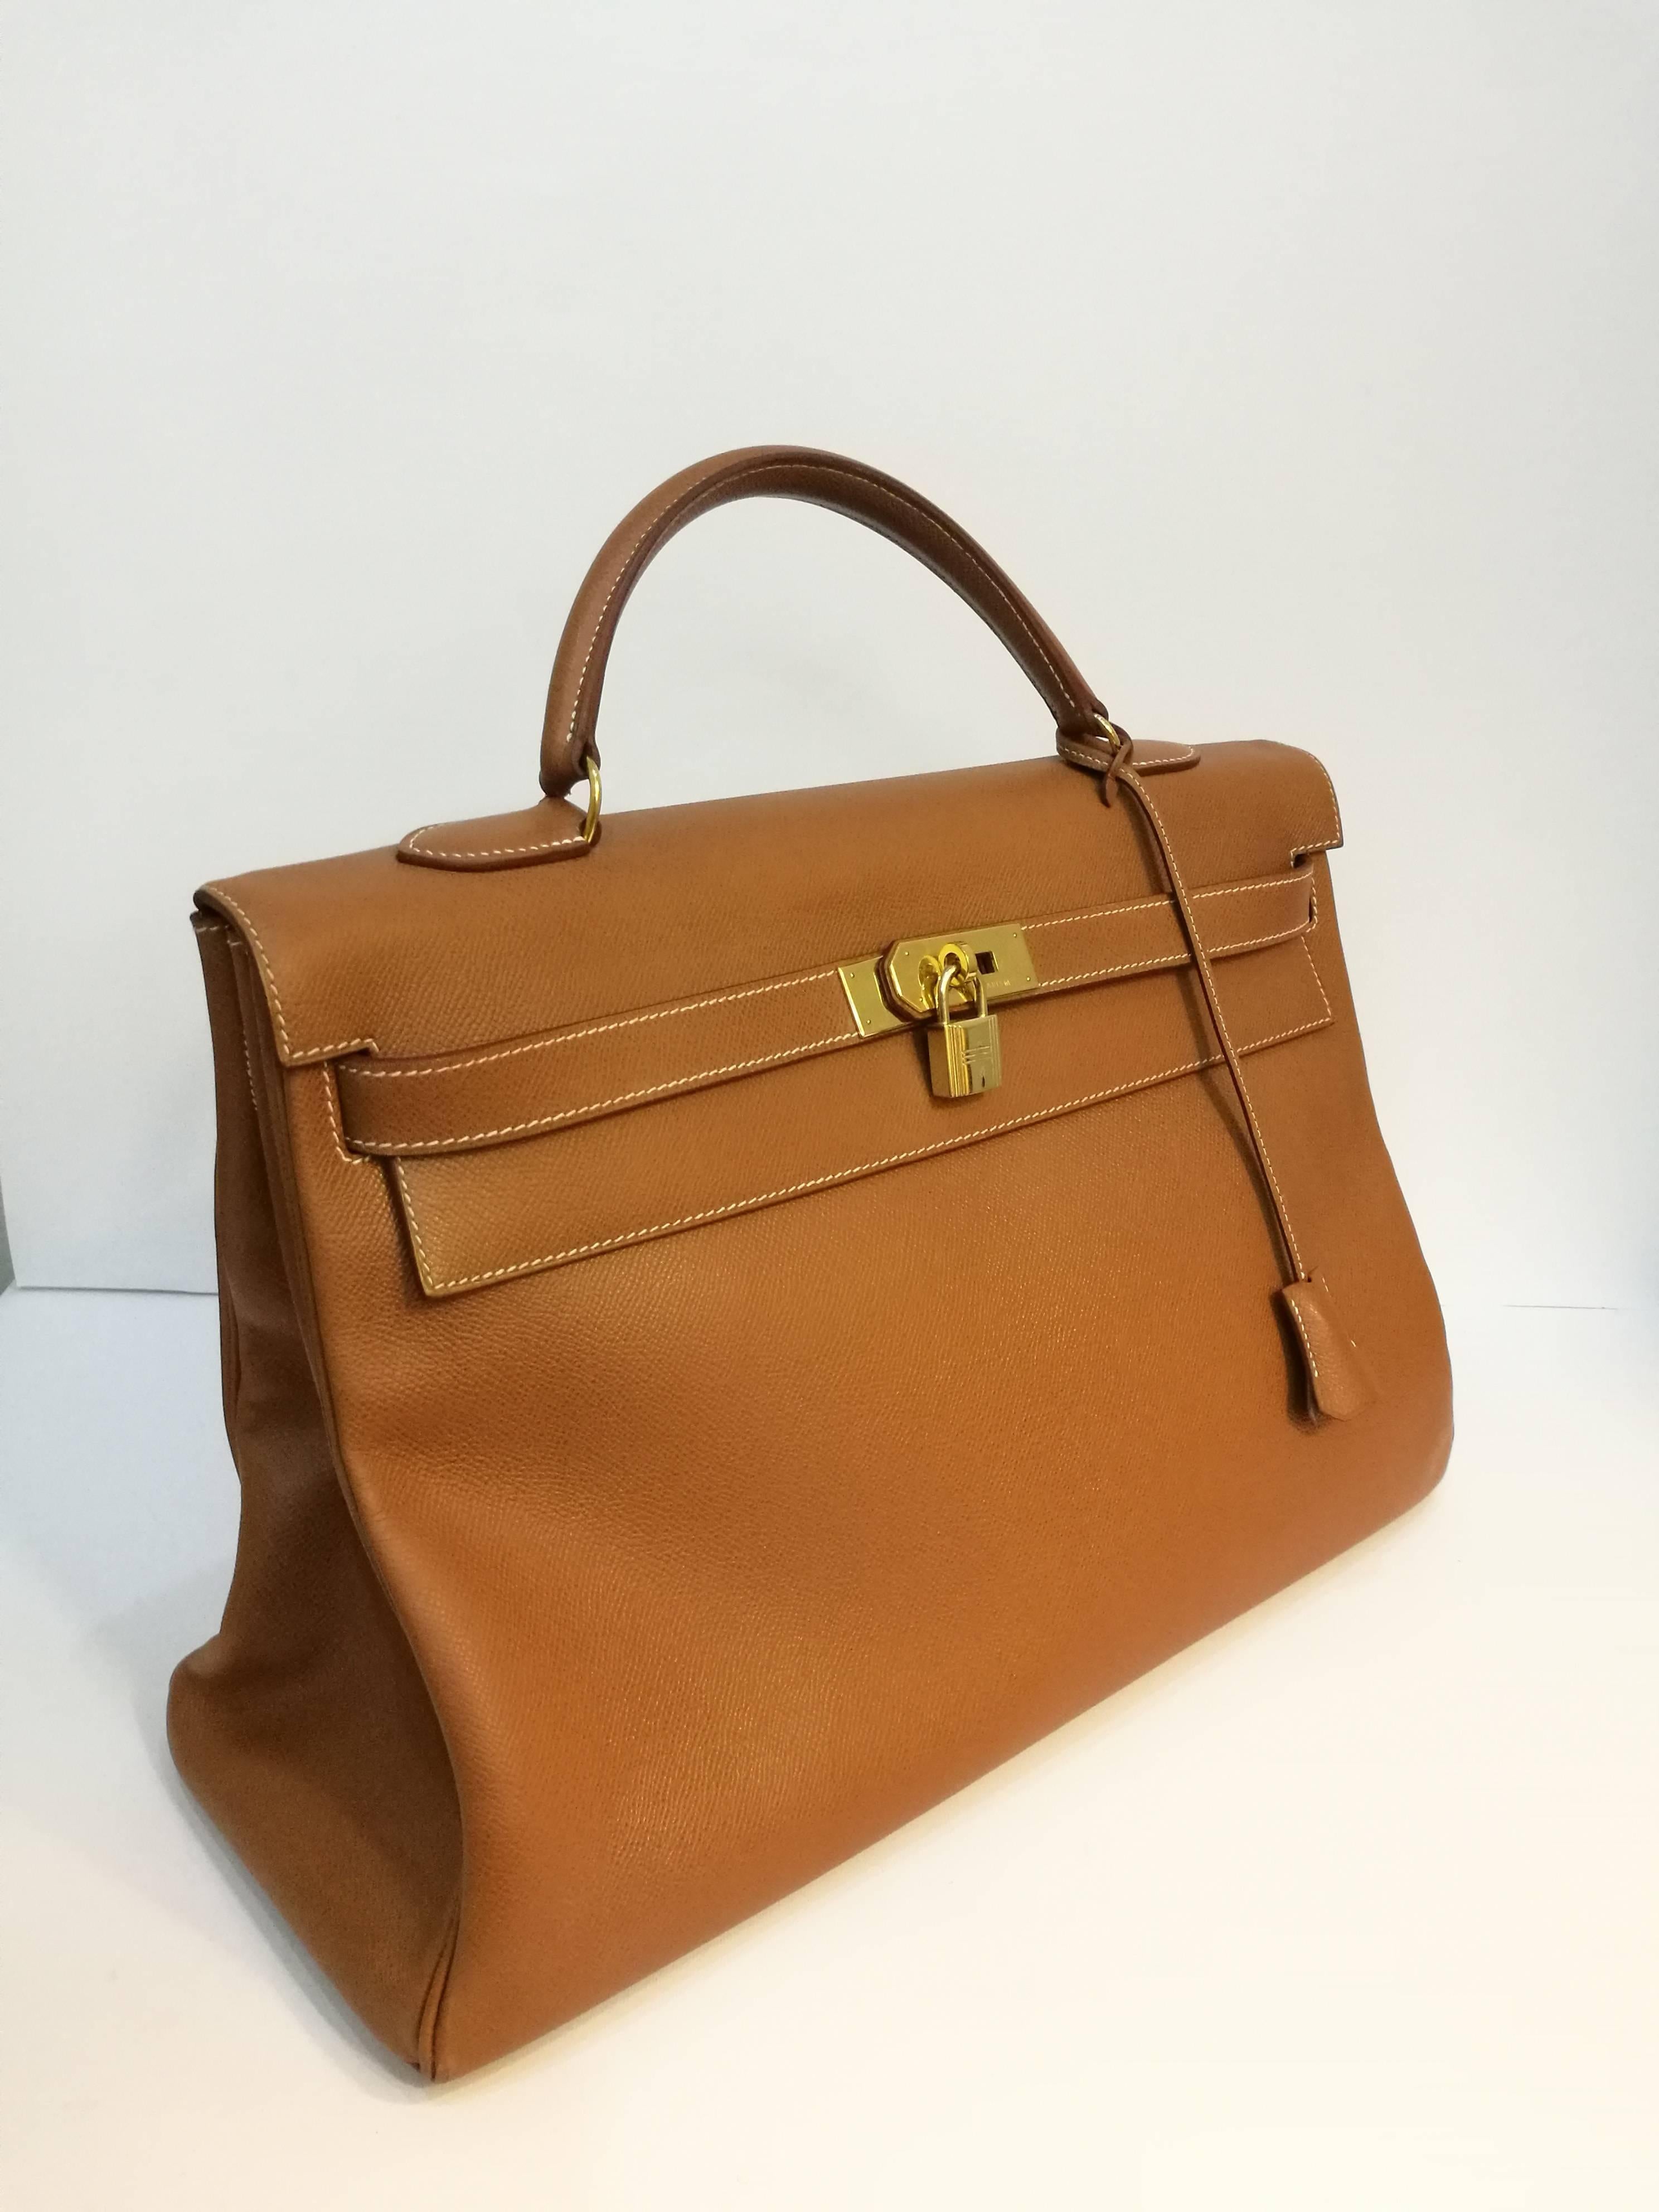 Hermès nude leather 40 cm Kelly Gold Tone Hardware

Made in france